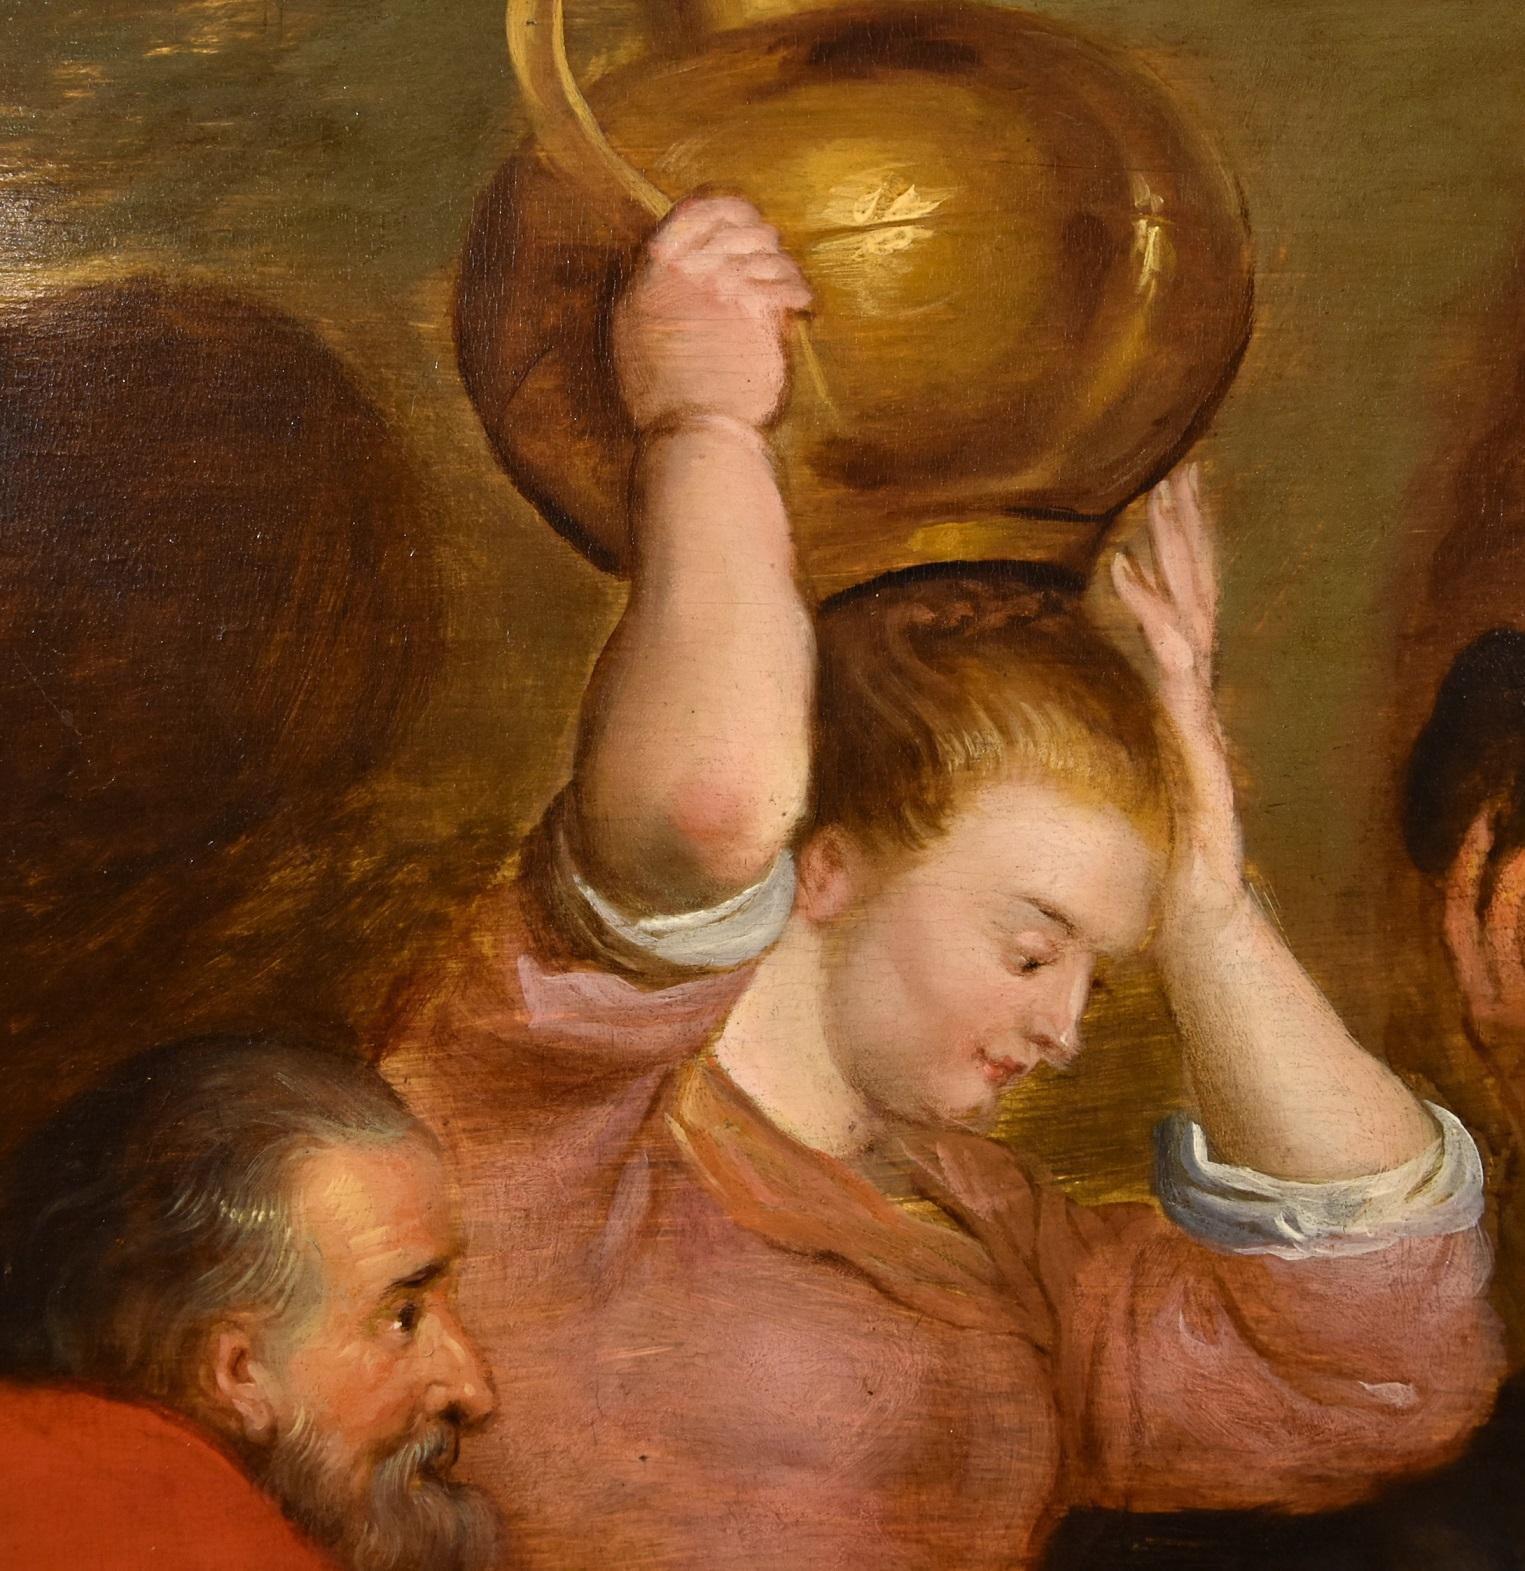 Workshop Rubens Adoration Shepherds Paint Oil on table Old master 17th Century 12